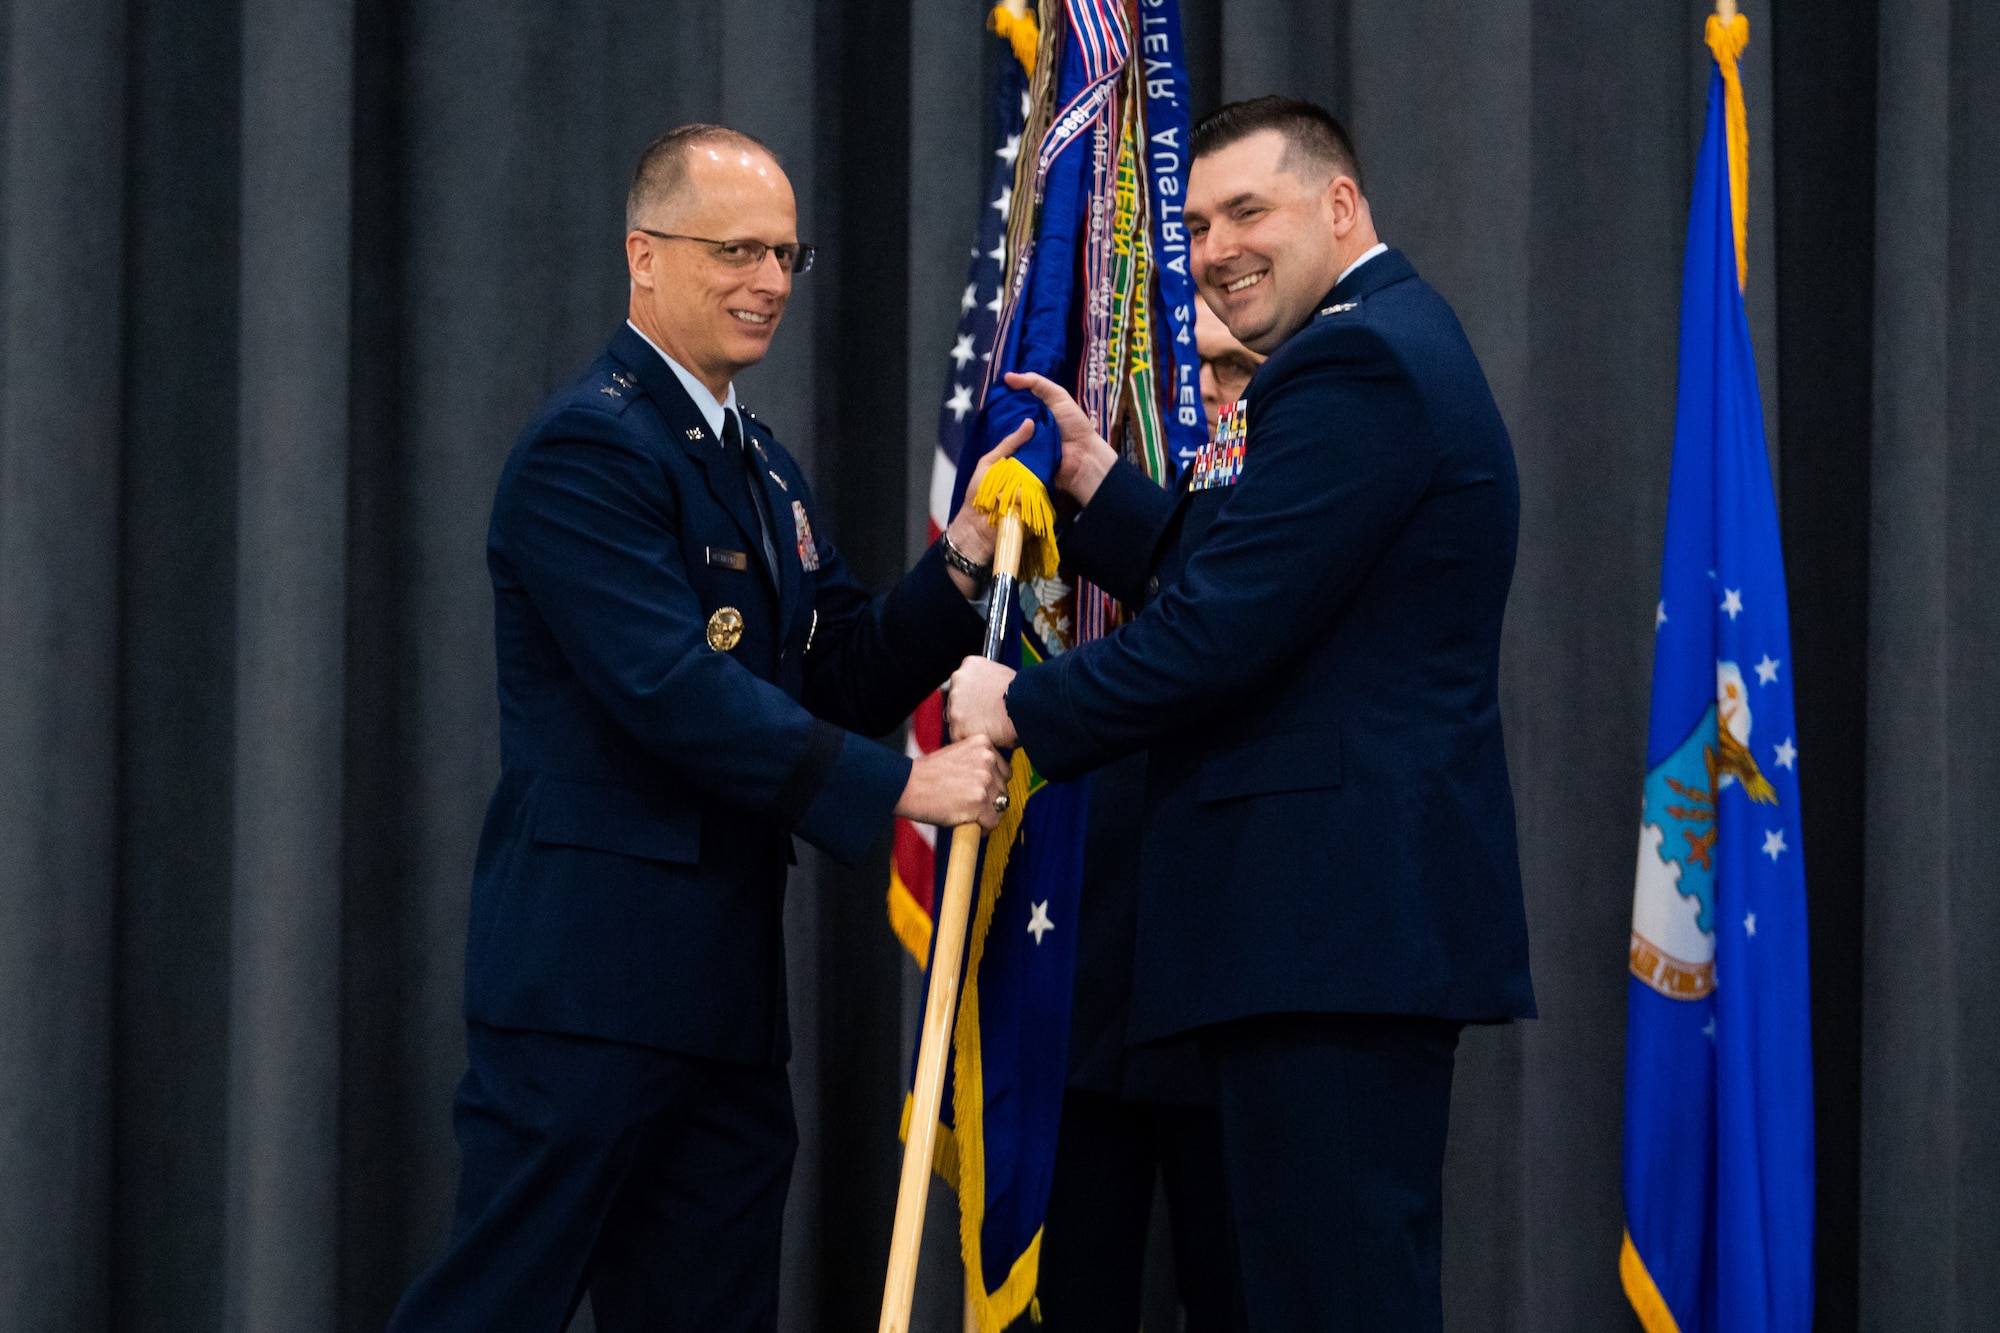 Col. Mark C. Dmytryszyn, right, incoming 2nd Bomb Wing commander, receives the guidon from Maj. Gen. Mark E. Weatherington, 8th Air Force and Joint-Global Strike Operations Center commander, during a change of command ceremony at Barksdale Air Force Base, La., July 23, 2020. The passing of a squadron’s guidon symbolizes a transfer of command. (U.S. Air Force photo by Airman 1st Class Jacob B. Wrightsman)